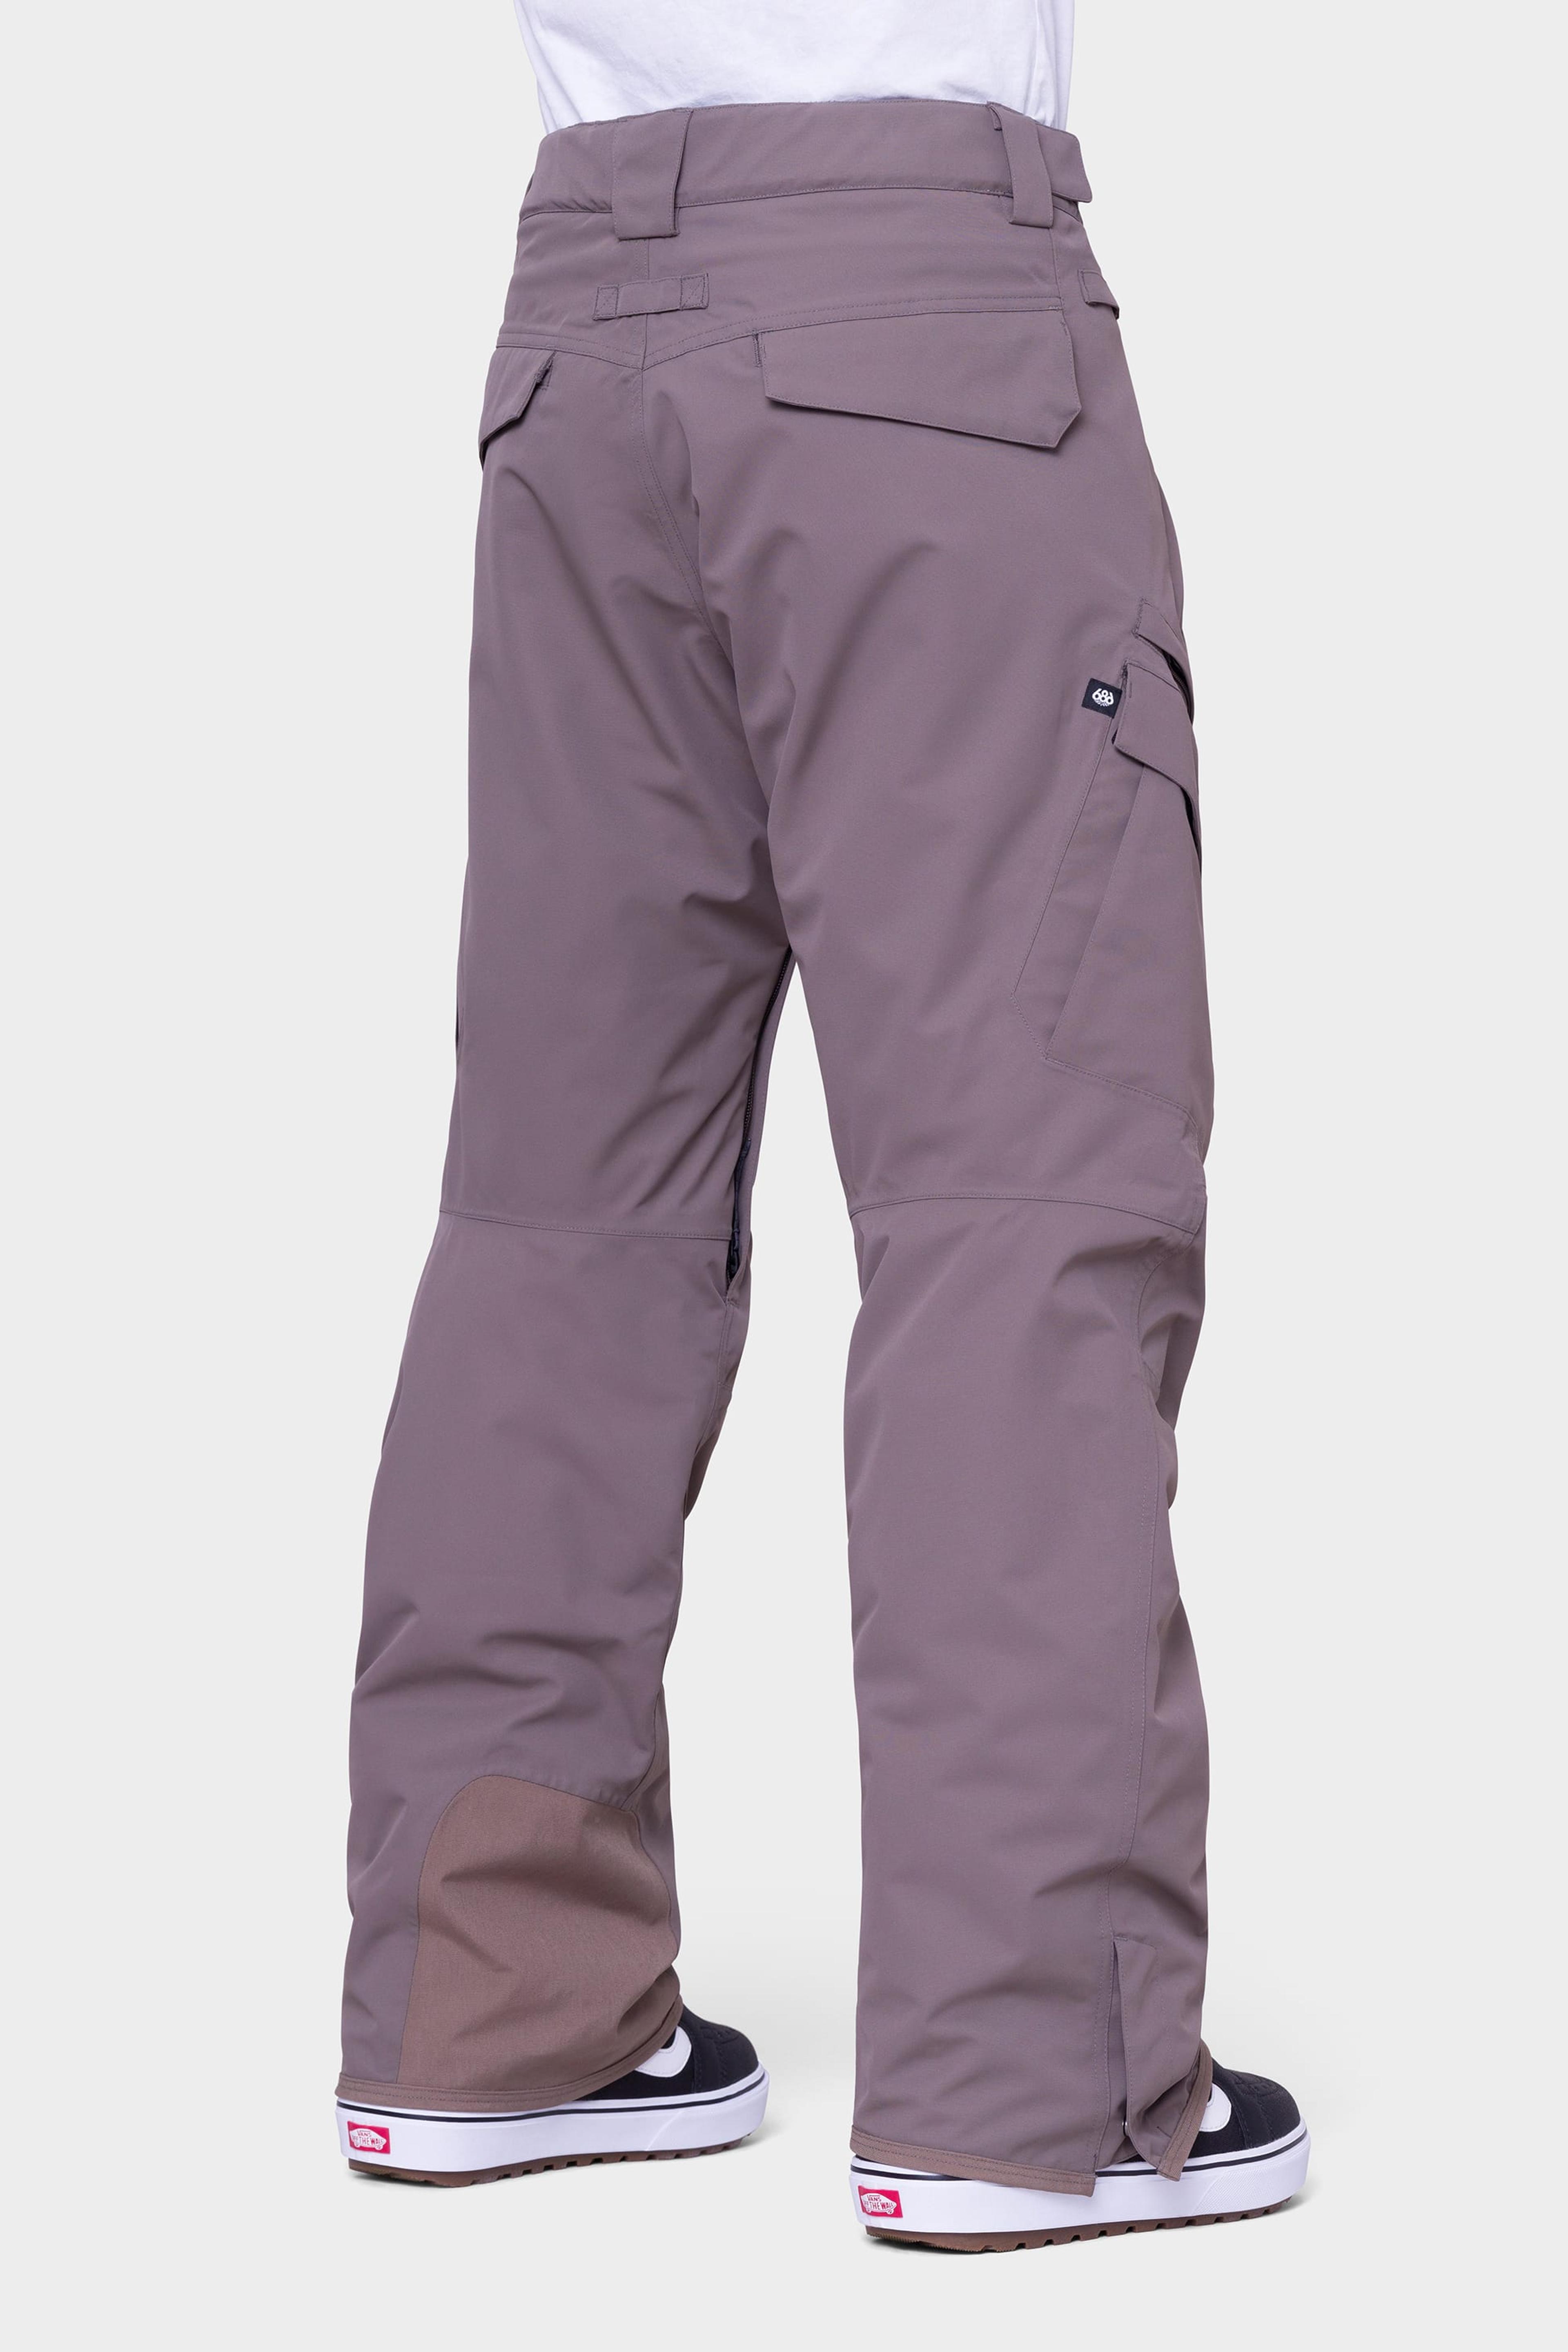 Alternate View 45 of 686 Men's SMARTY 3-in-1 Cargo Pant